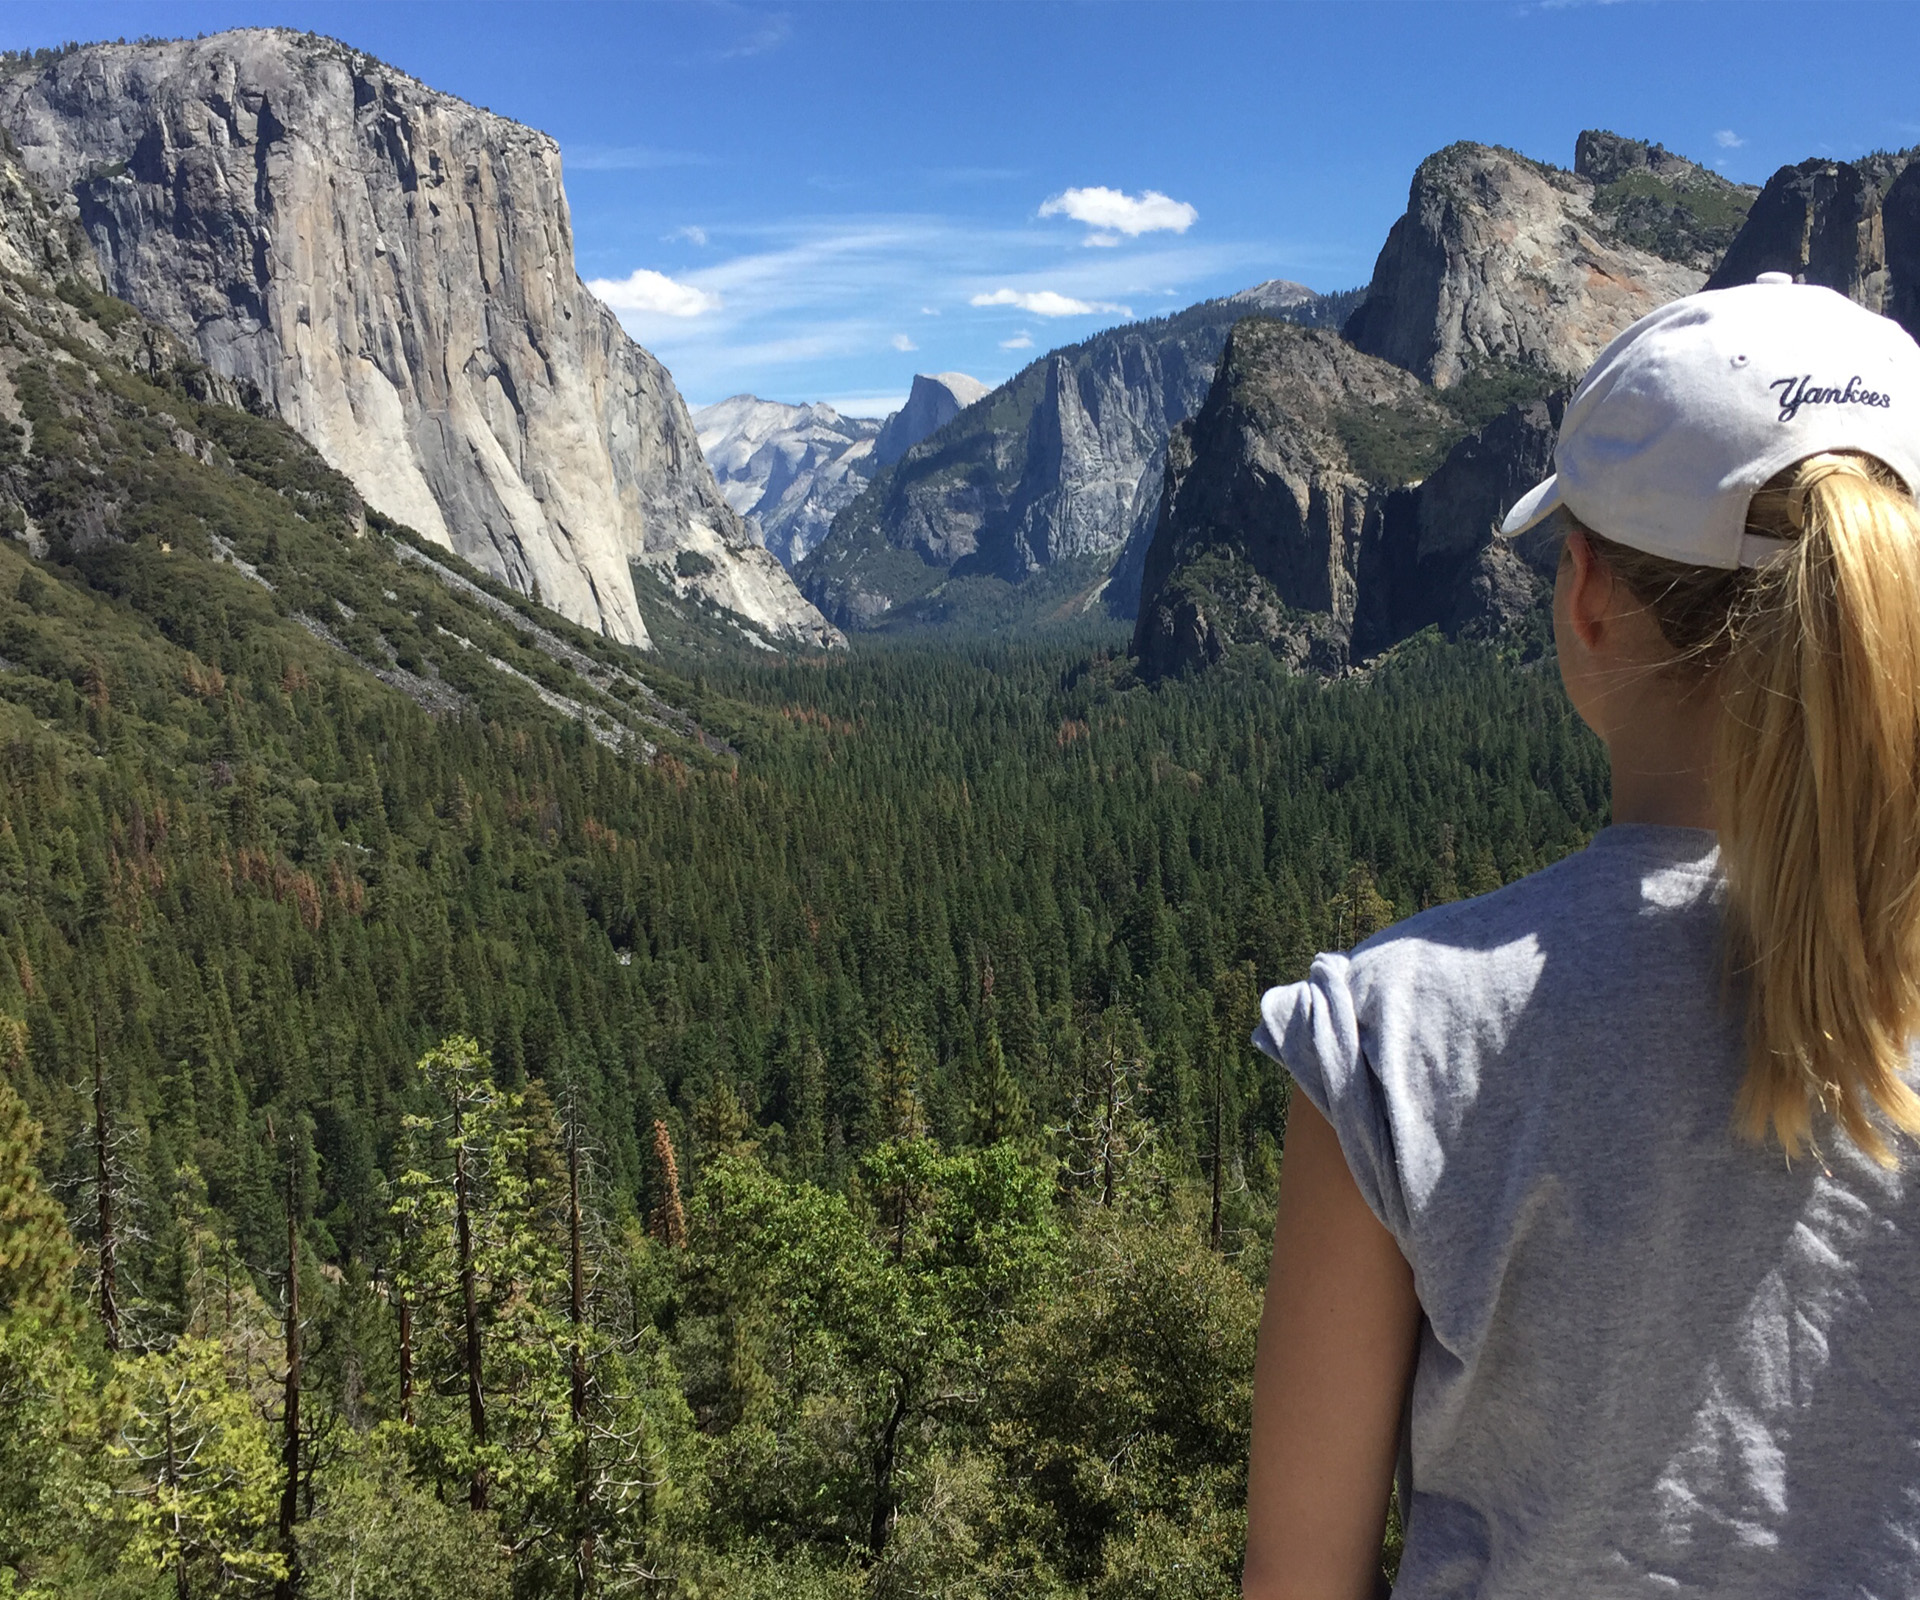 The Weekly’s guide to Yosemite